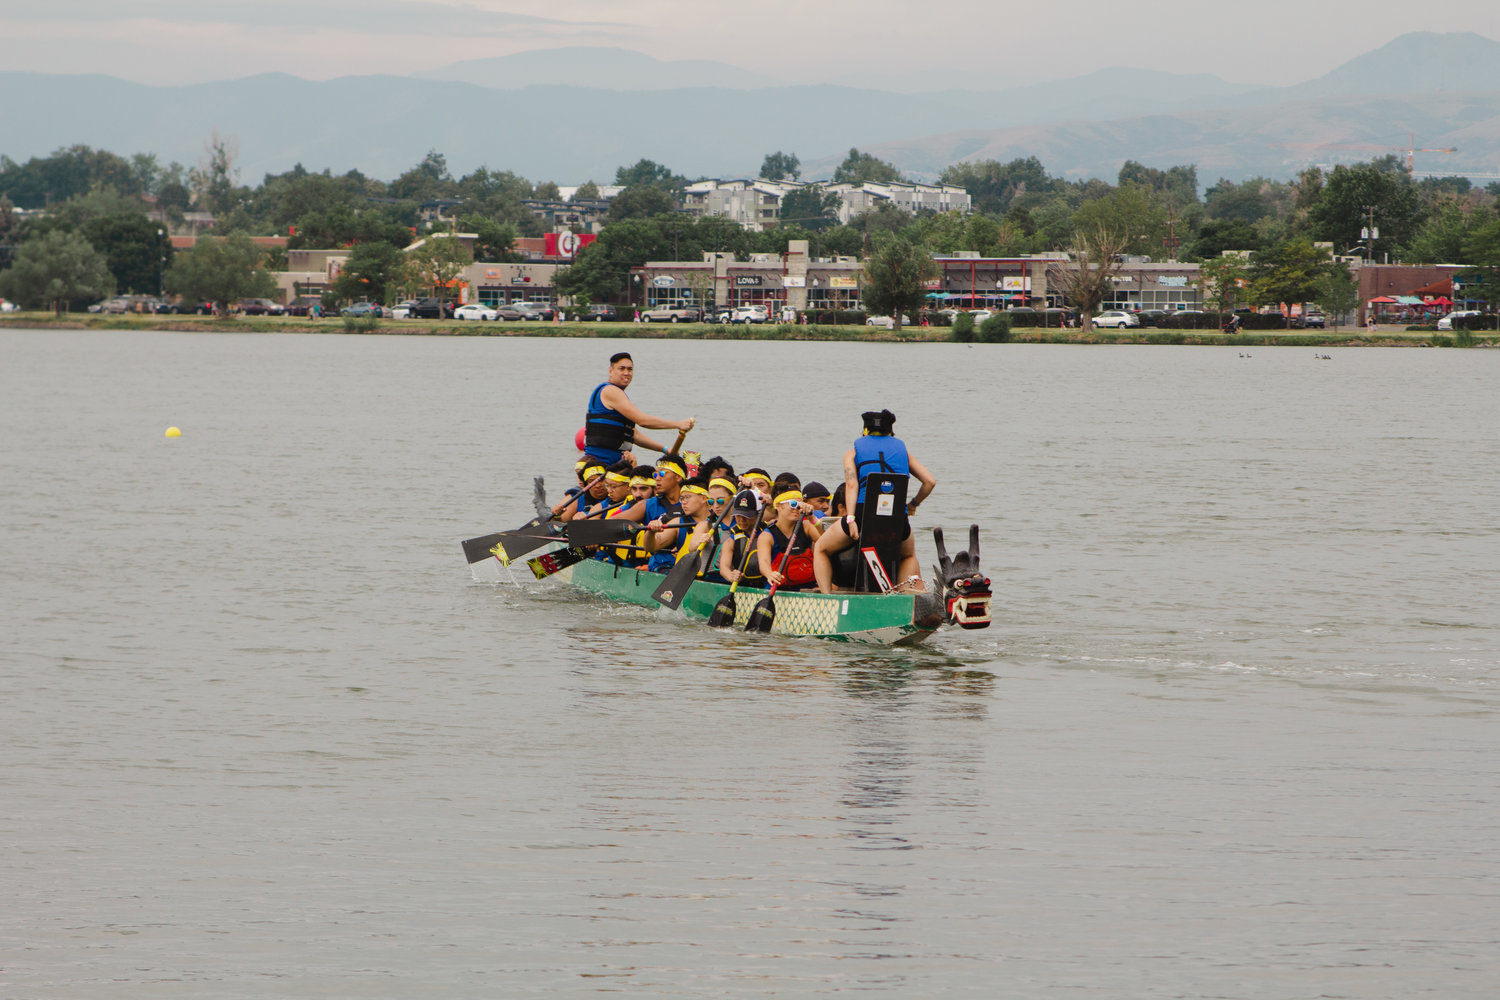 Grey skies helped keep things cool at the Colorado Dragon Boat Festival July 24.